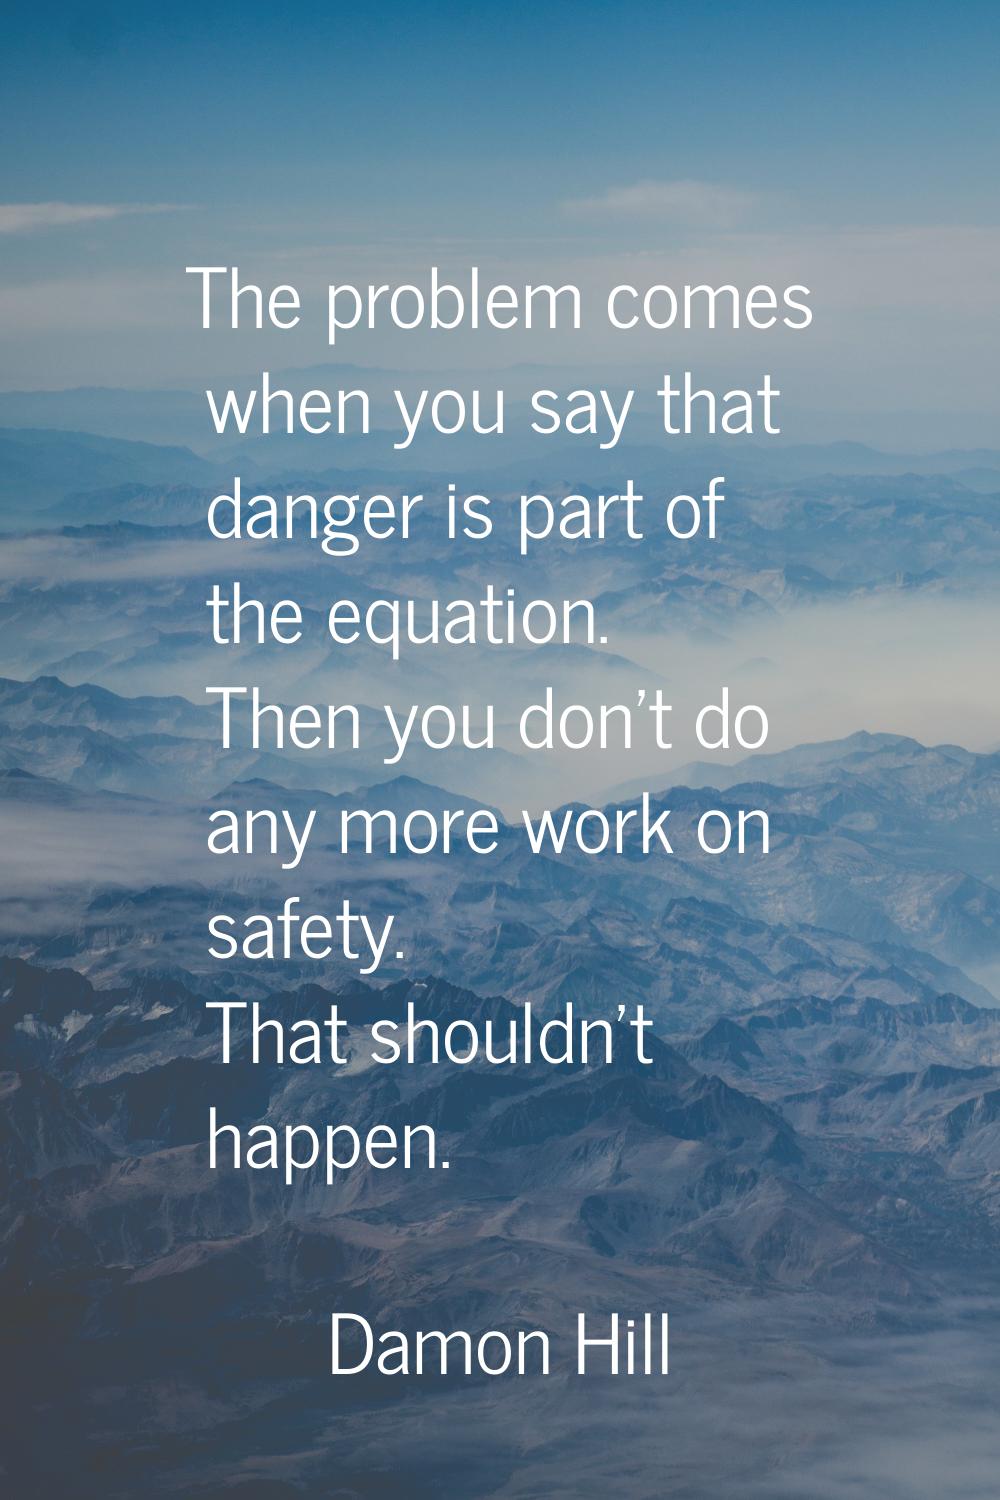 The problem comes when you say that danger is part of the equation. Then you don't do any more work